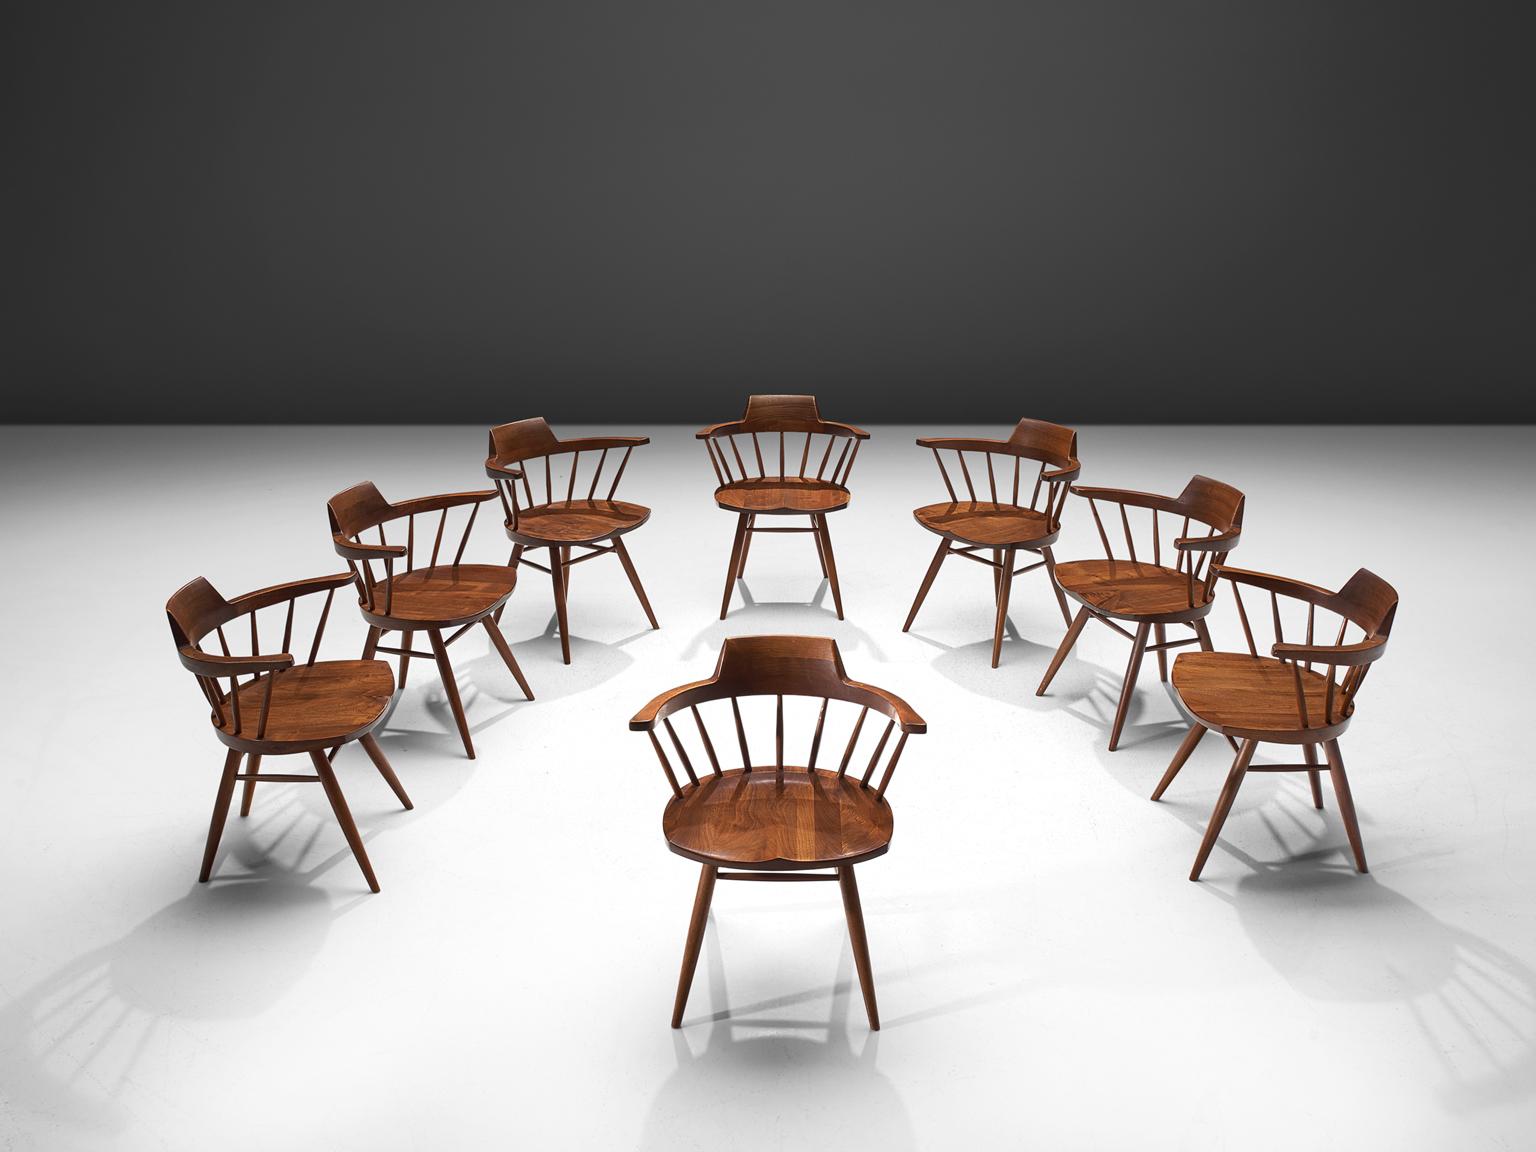 George Nakashima, set of eight 'Captain' chairs, walnut, New Hope, PA, 1974.

This set of Captain chairs is designed by George Nakashima. It is not often that we come across a set that is eight pieces large. The captain chairs, executed in black